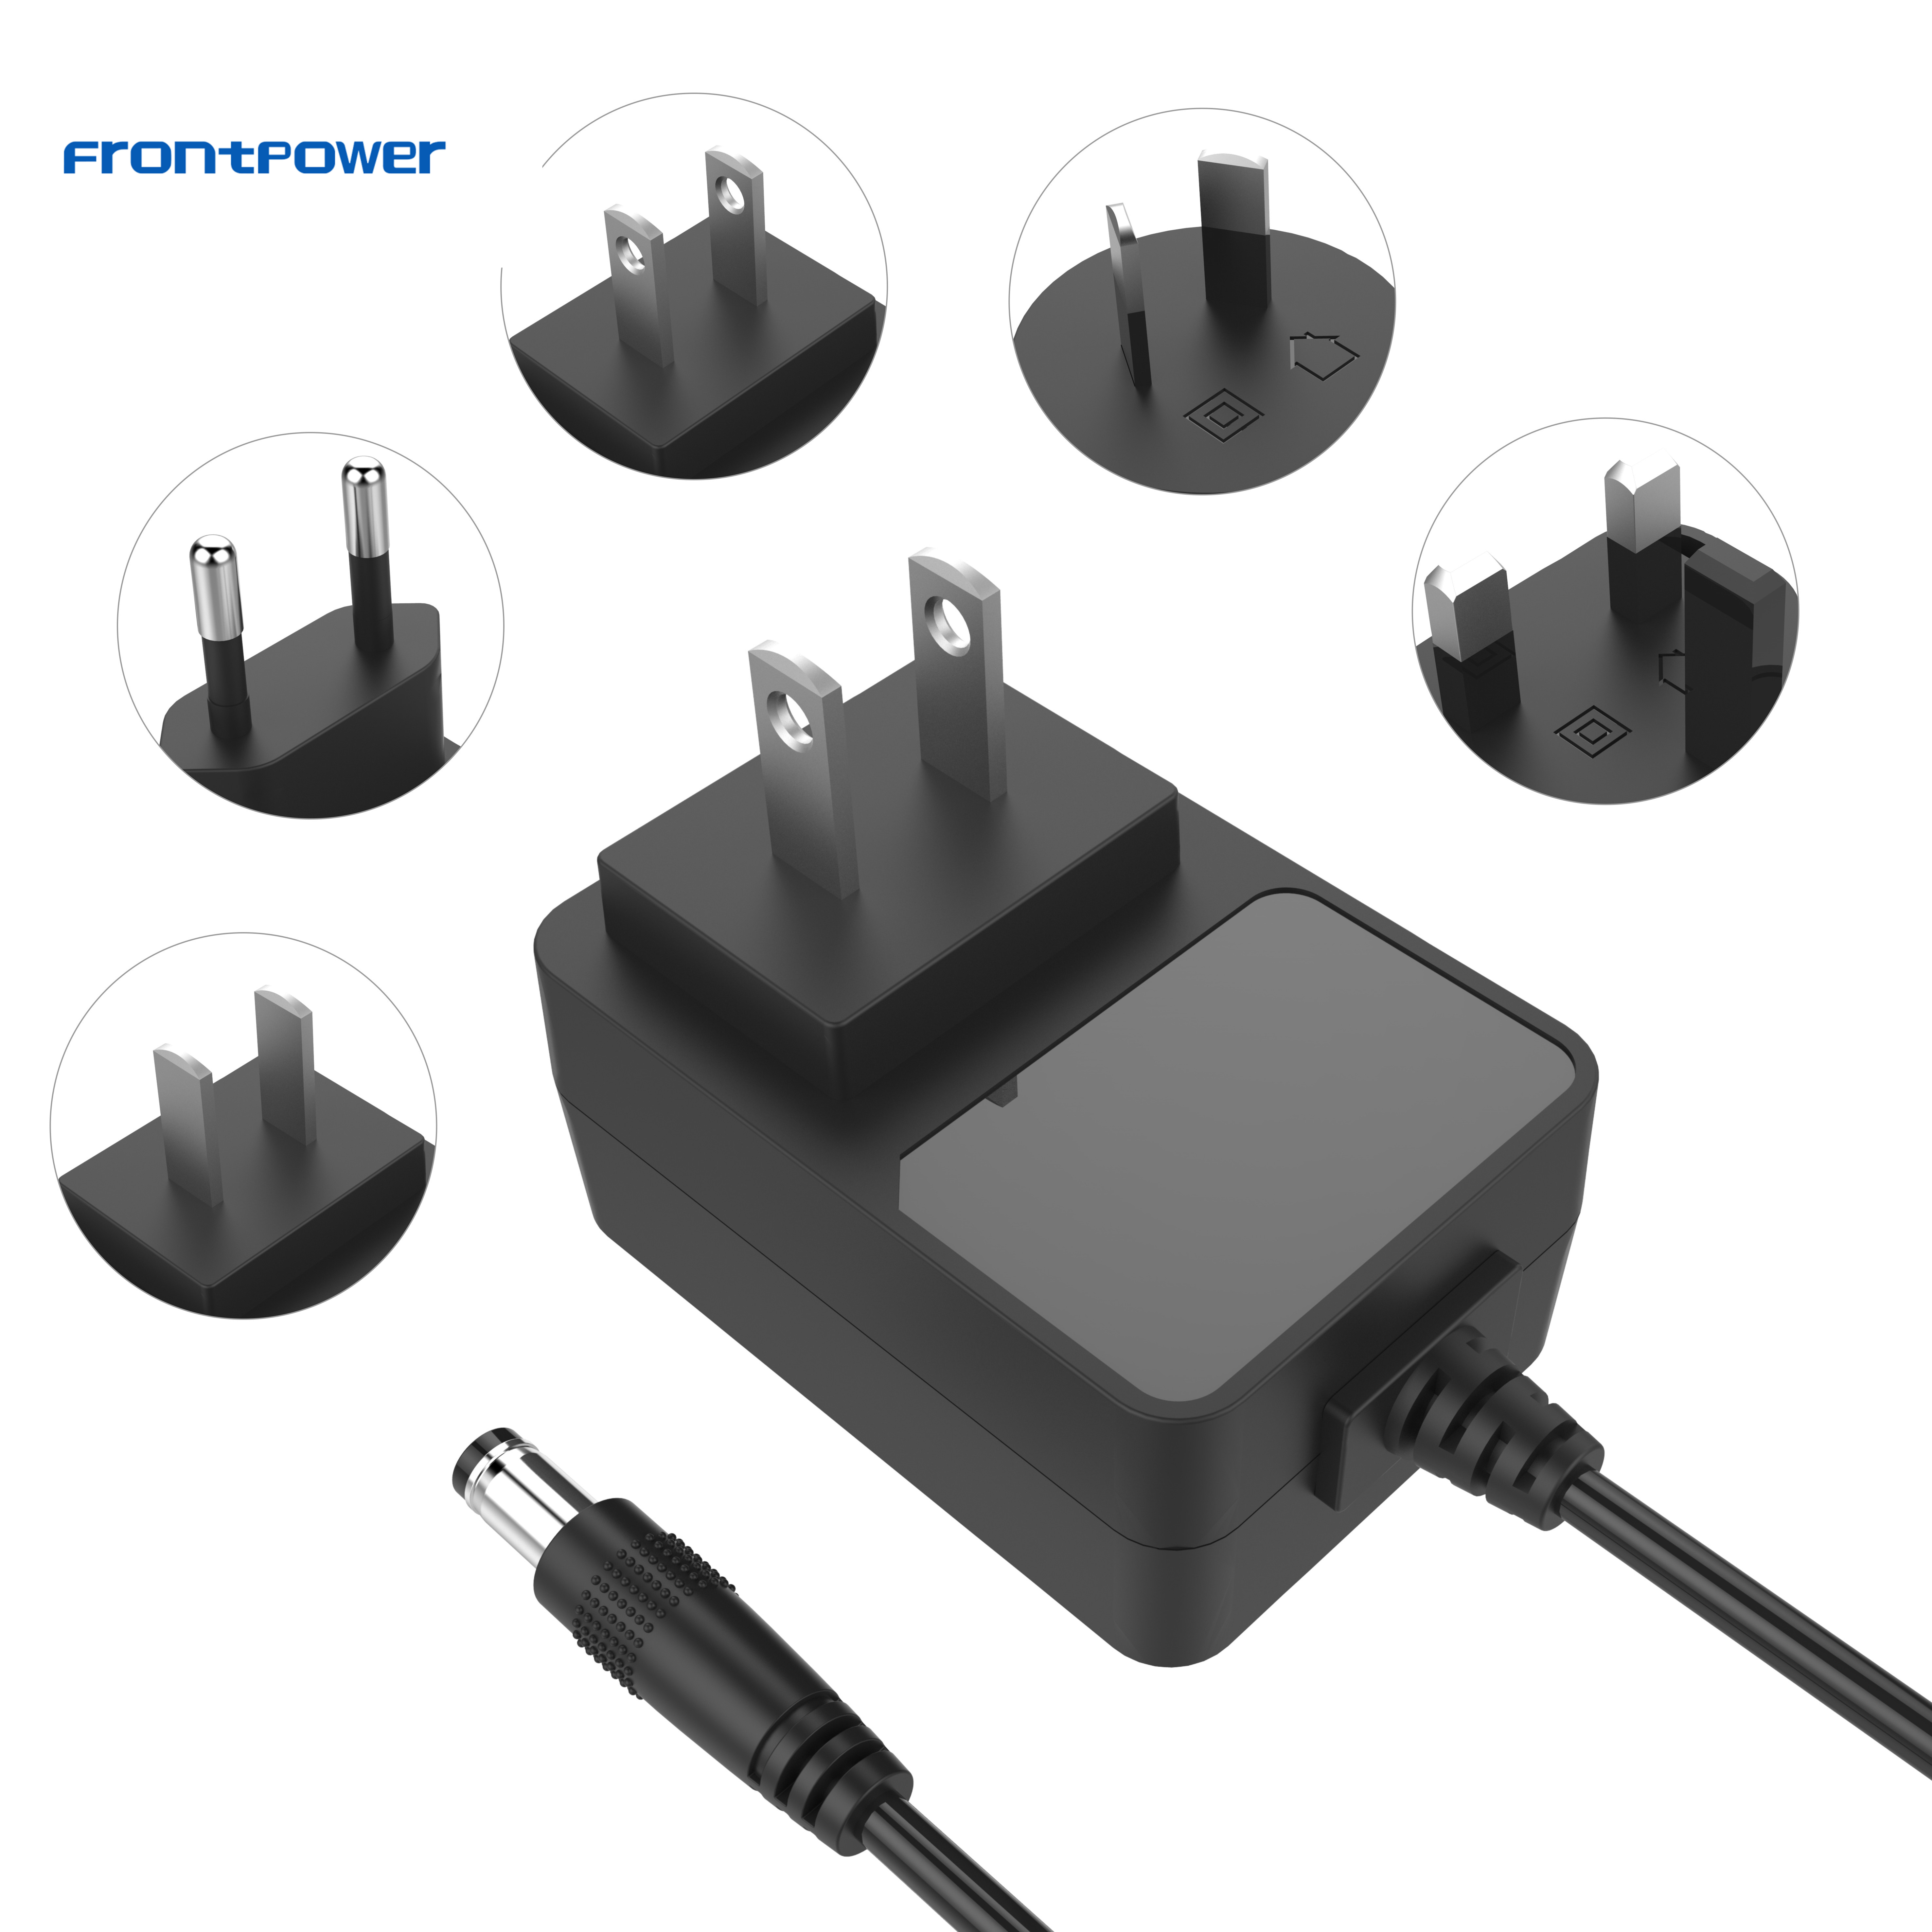 12W 5V 3A wall mount power adapter with BIS certification